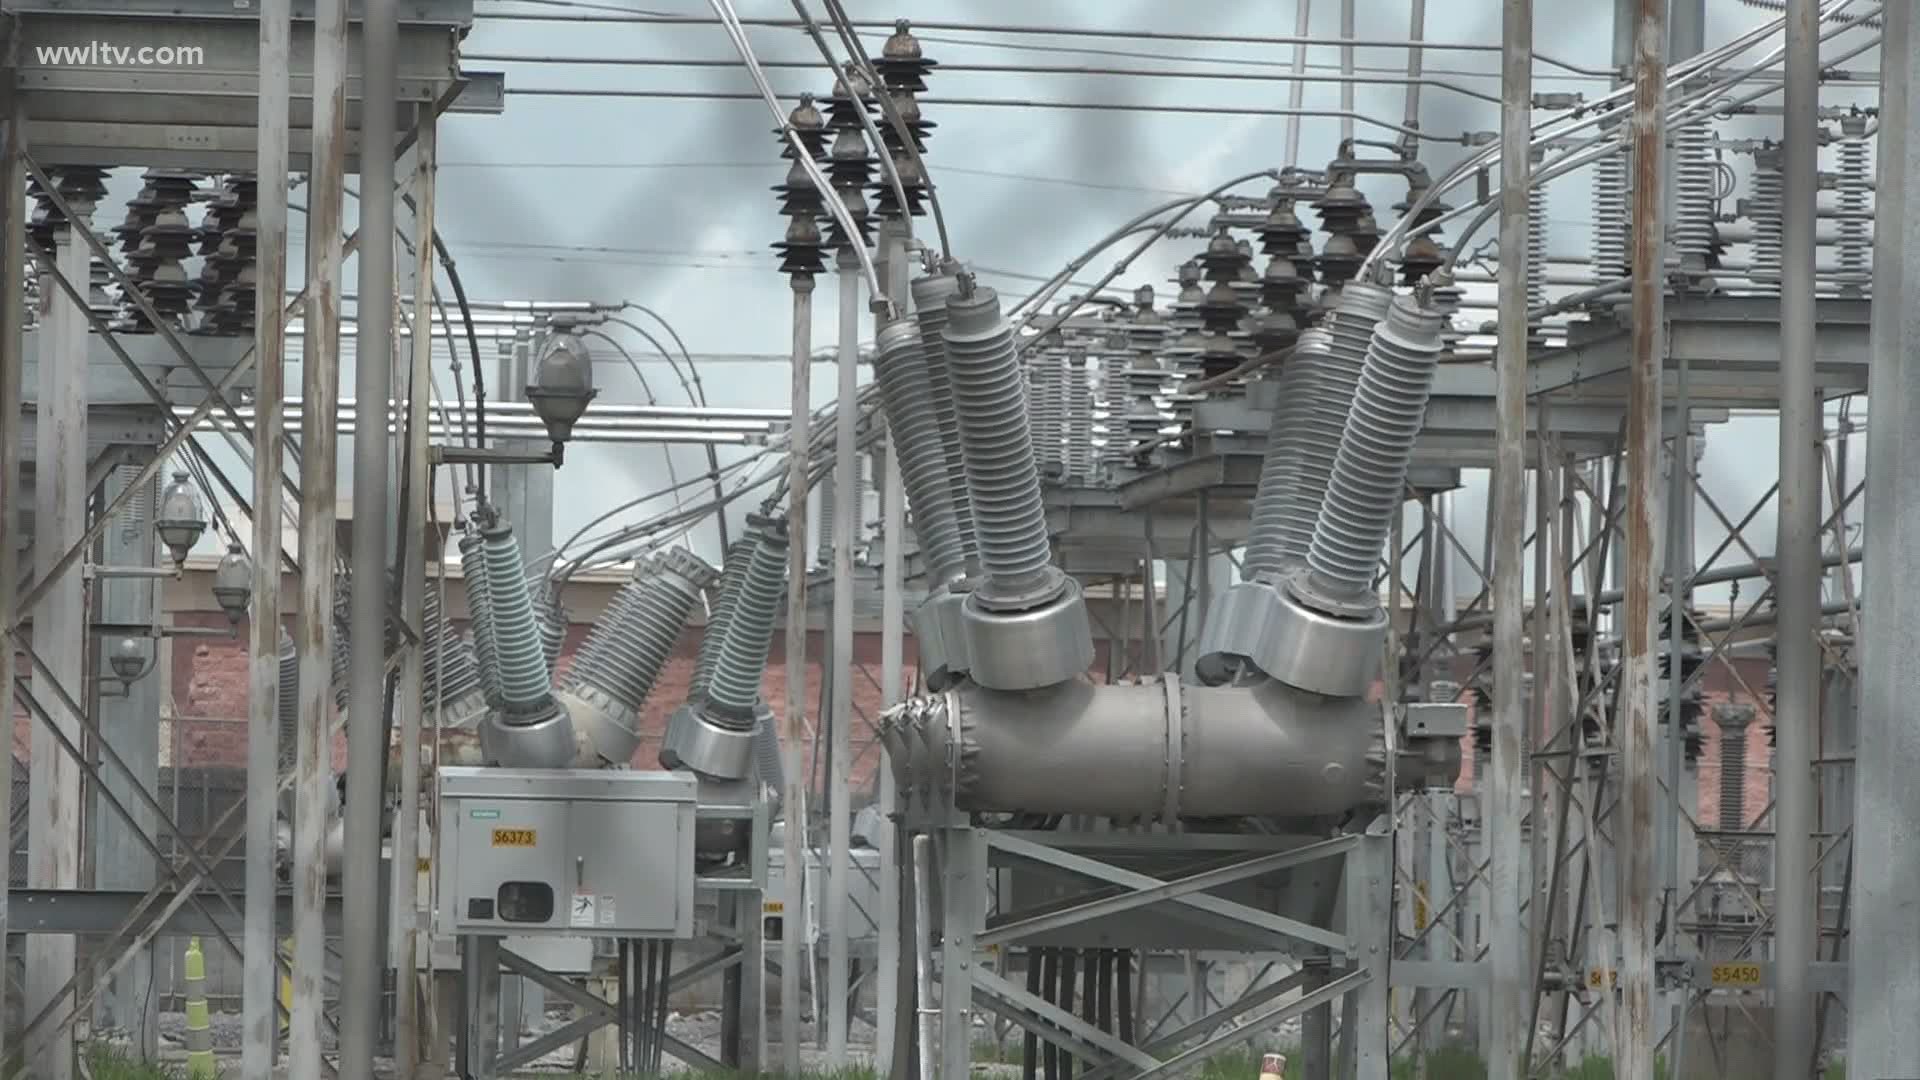 With dangerous record heat in the area, a second major power outage in the past four days was reported in Jefferson Parish Tuesday.